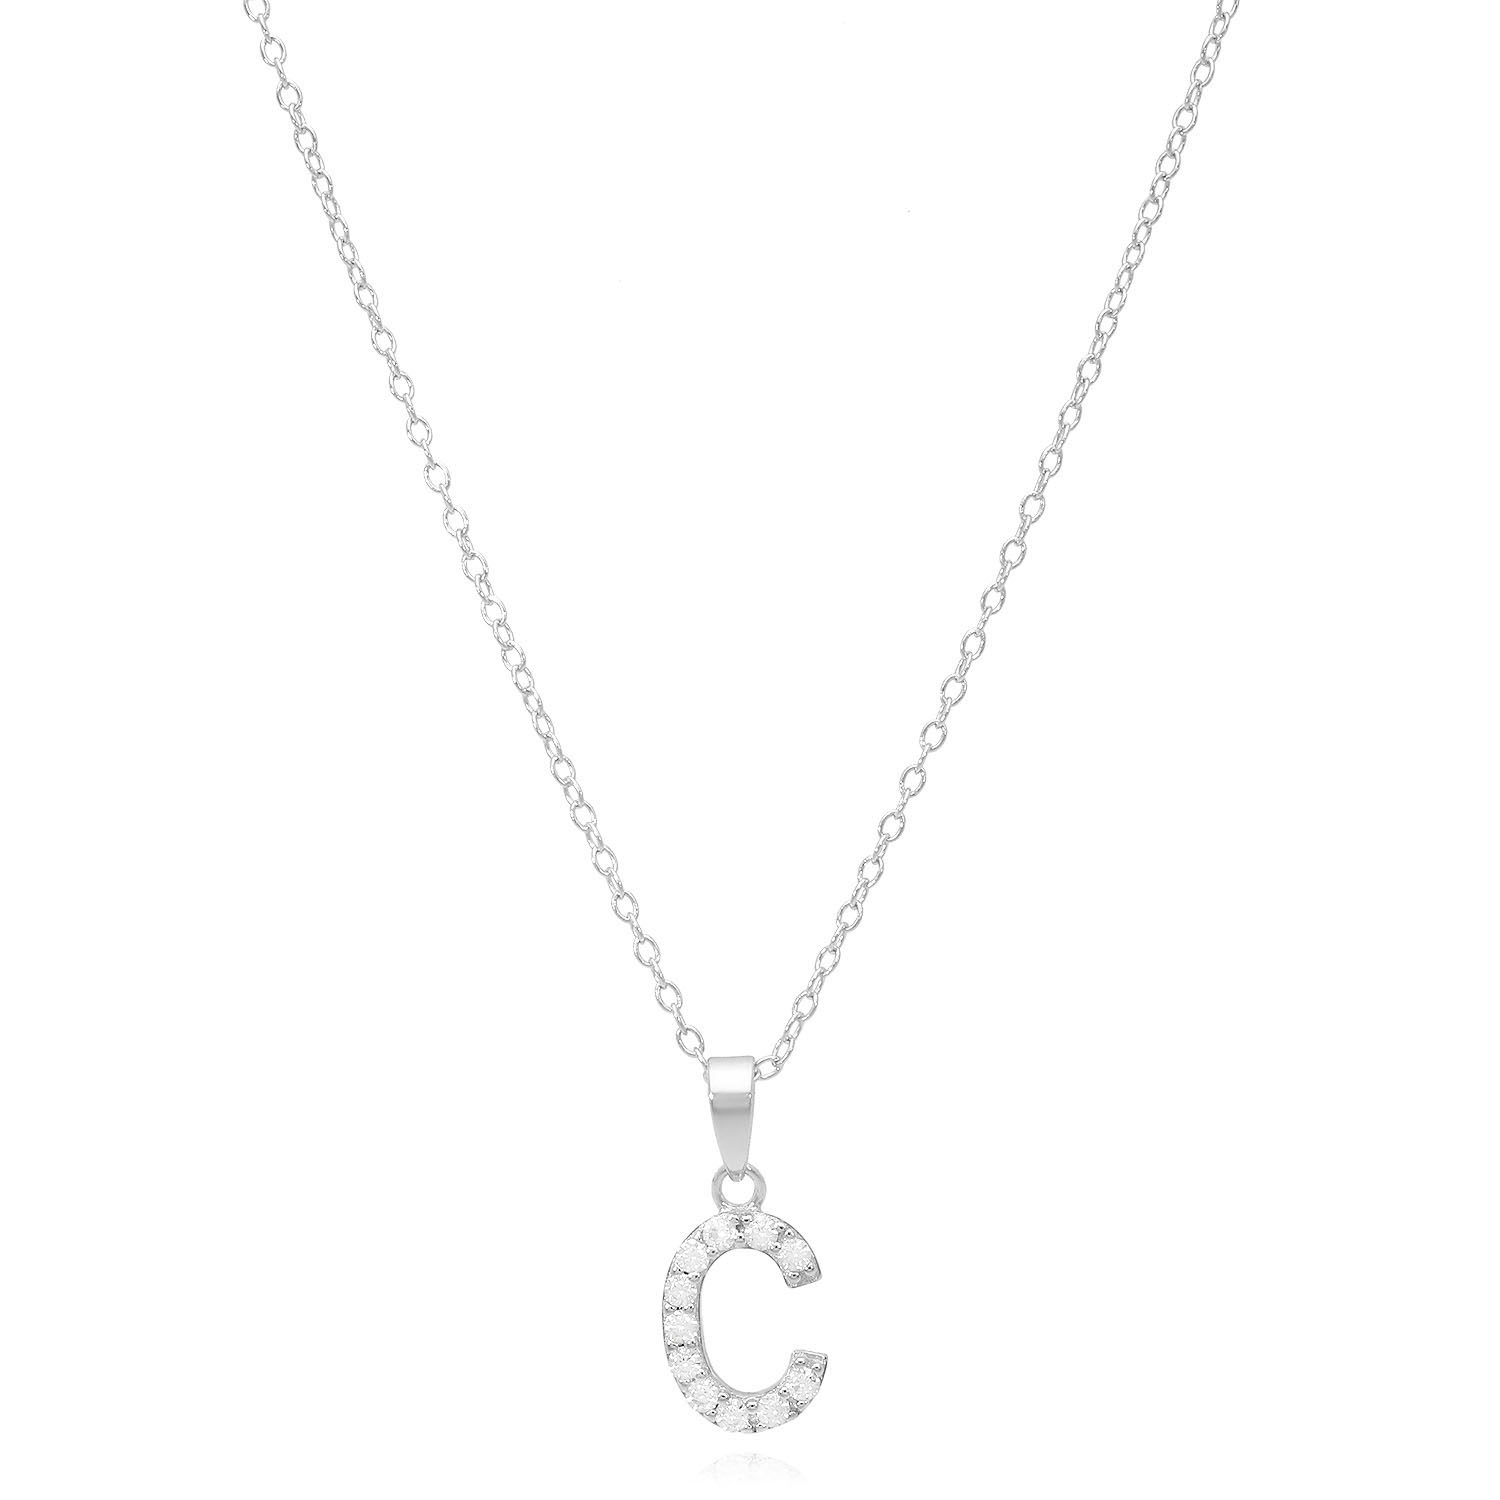 Sterling Silver Simulated Diamond Initial Pendant Chain Necklace 18" - C